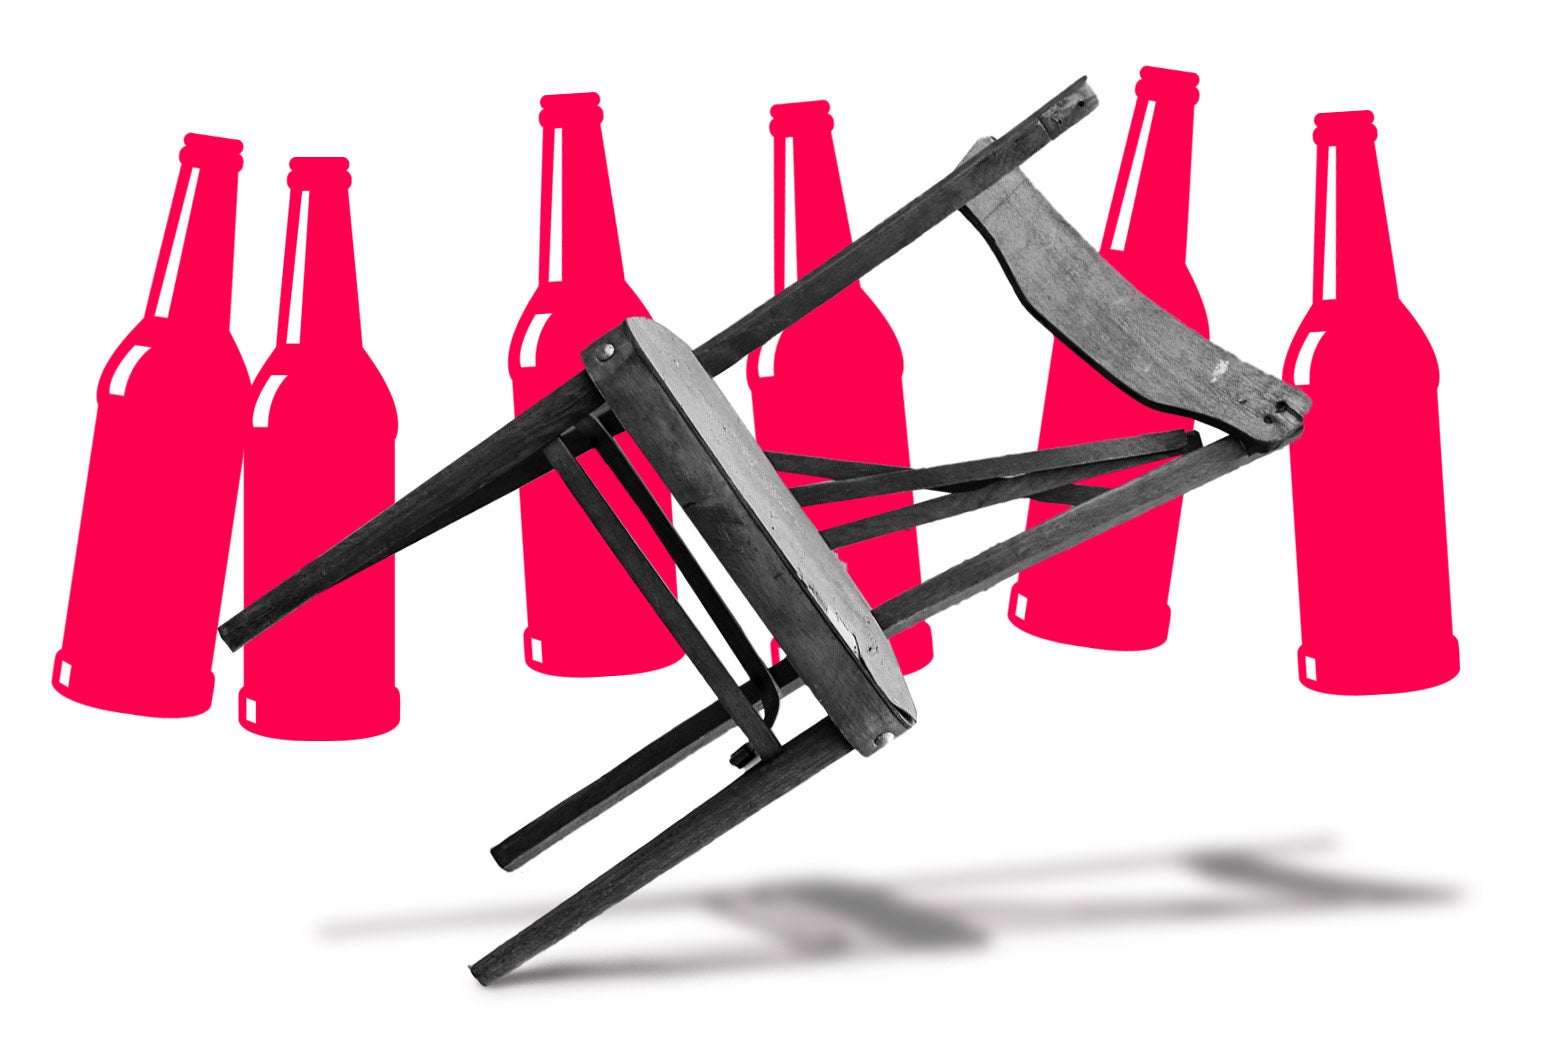 Graphics of beer bottles and a broken chair.